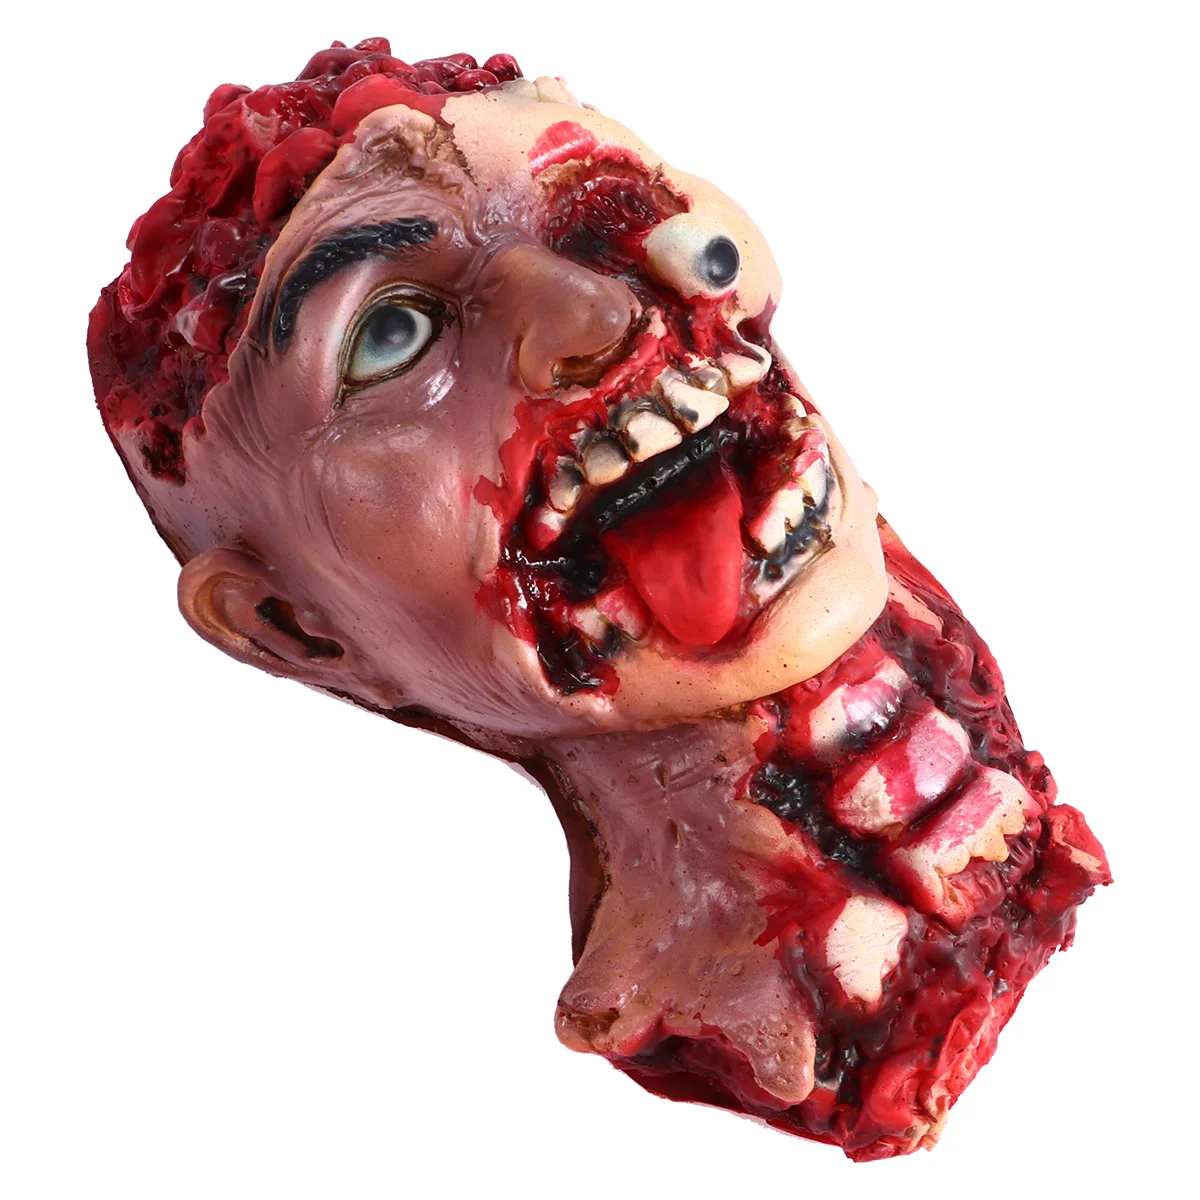 

Halloween Head Prop Scary Tricky Toy Horrible Fake Head Haunted House Prop